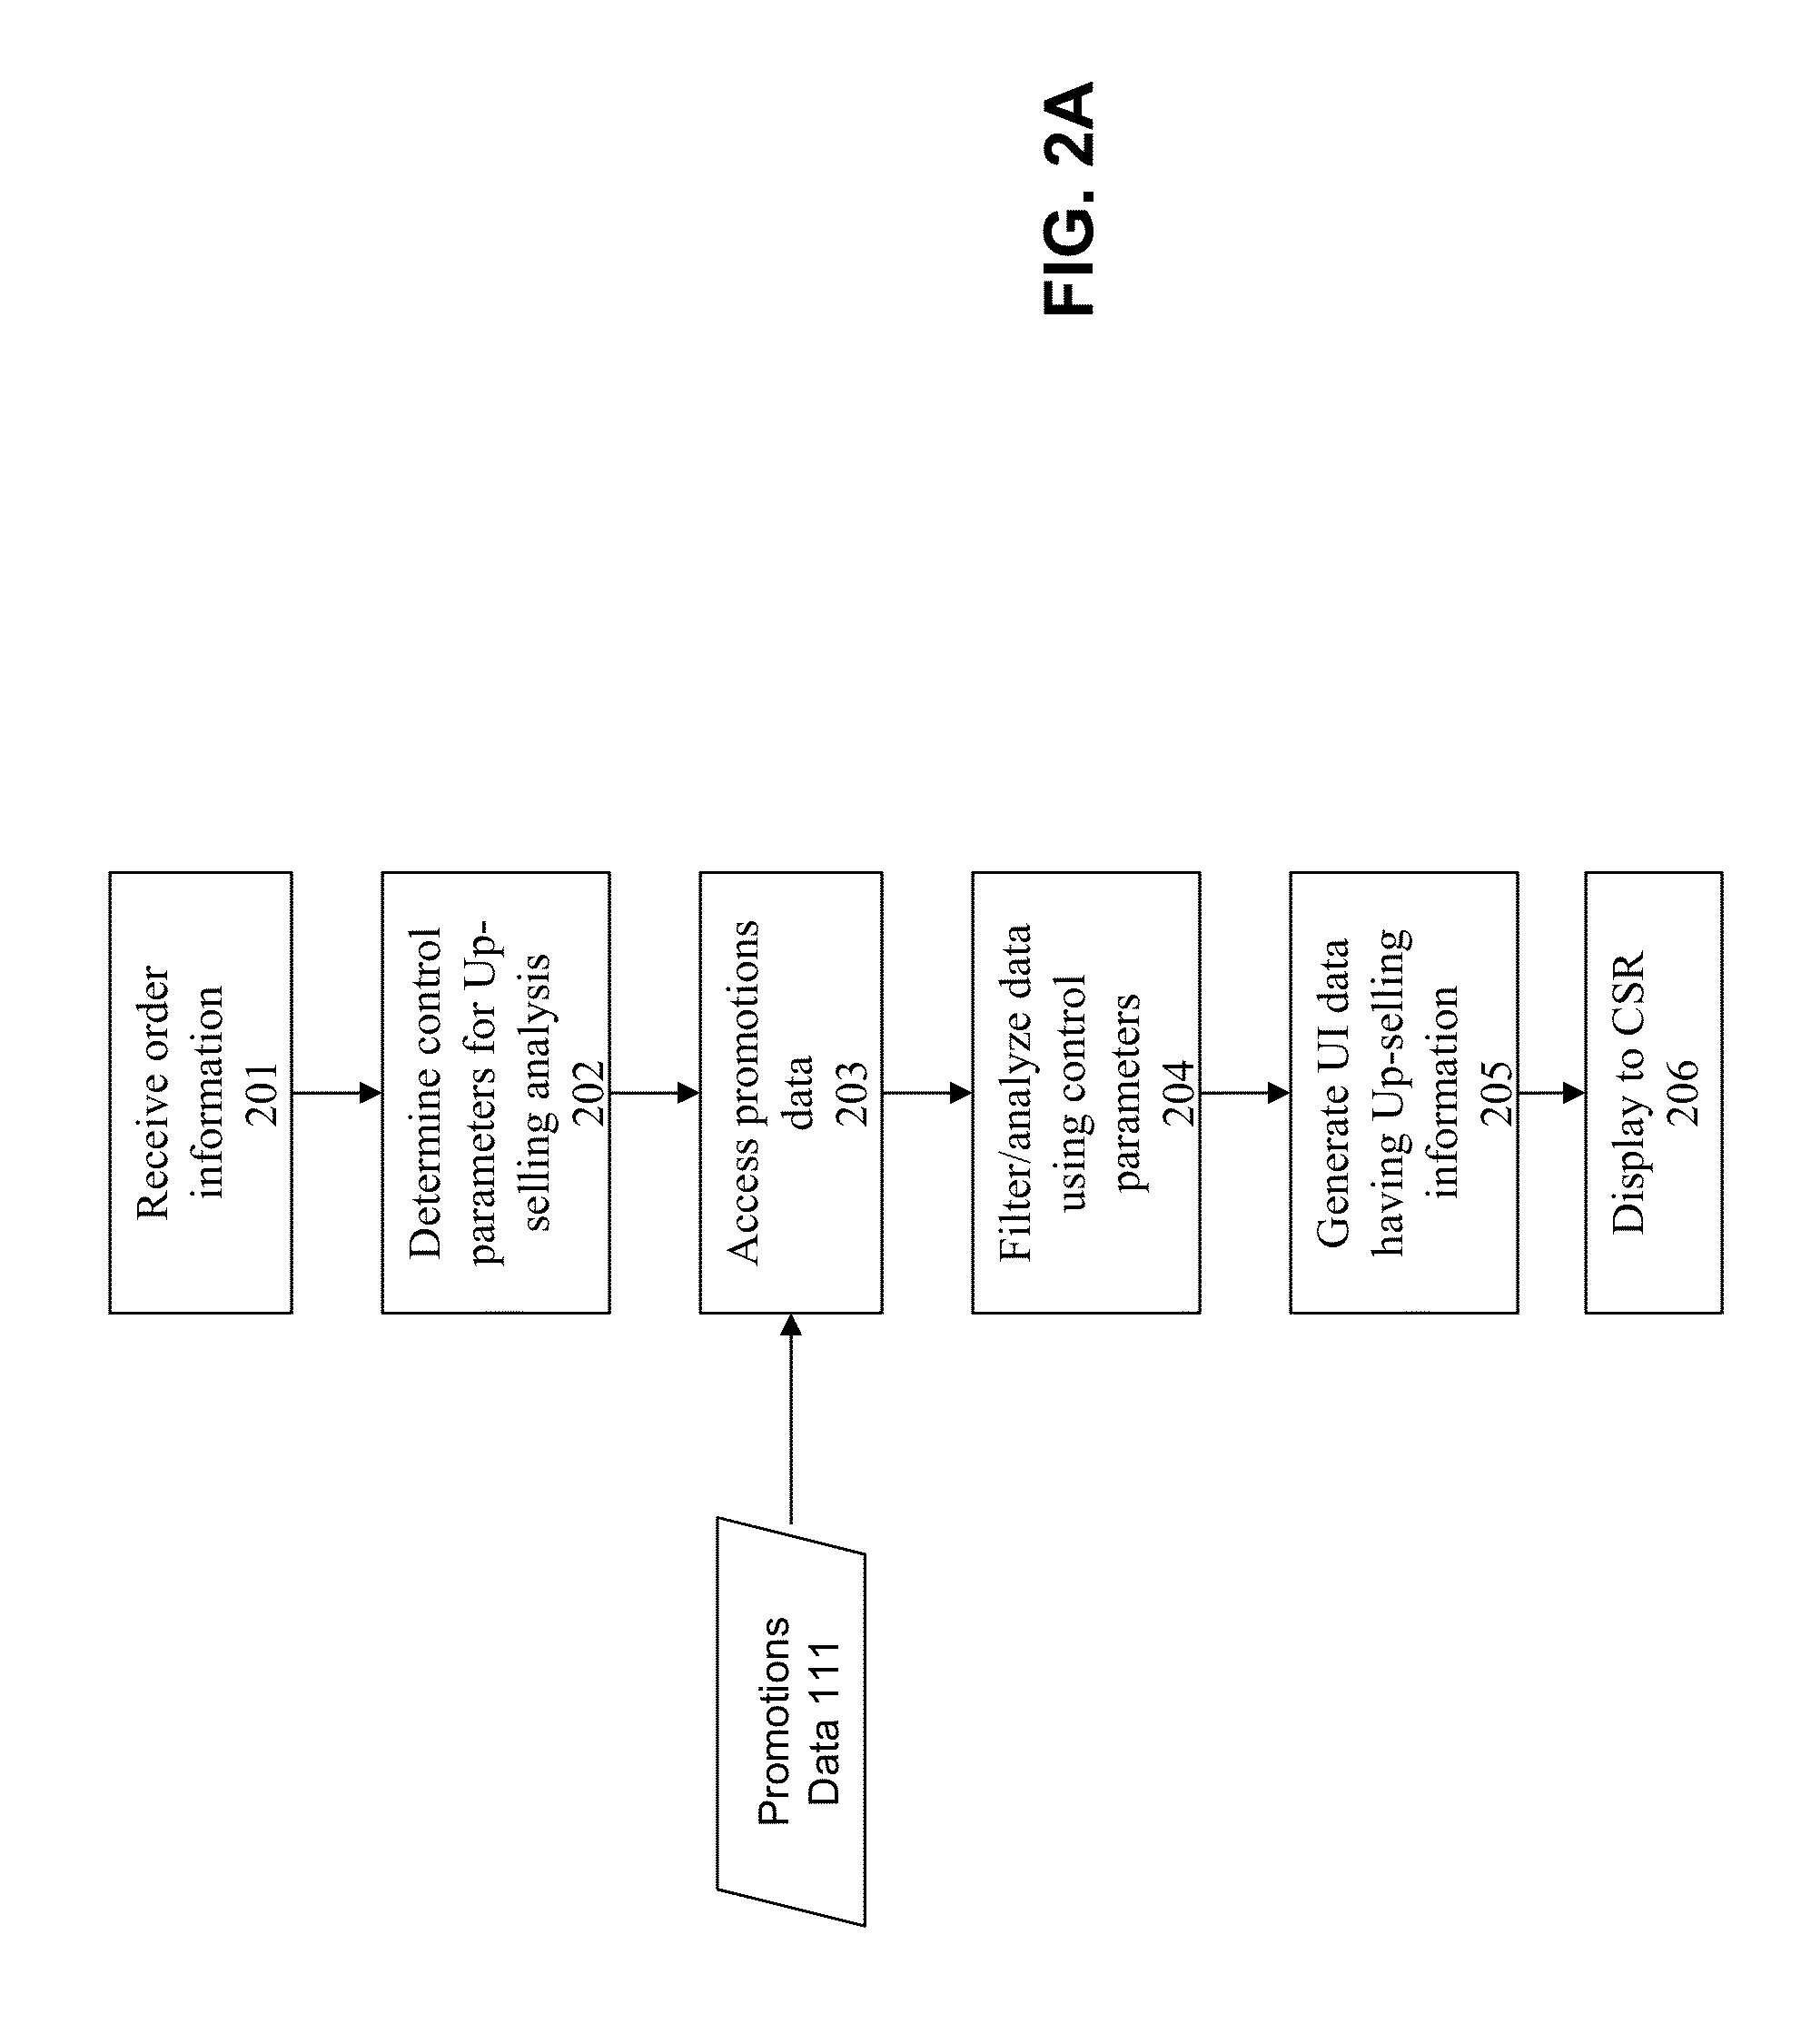 Method and system for implementing display of revenue opportunities